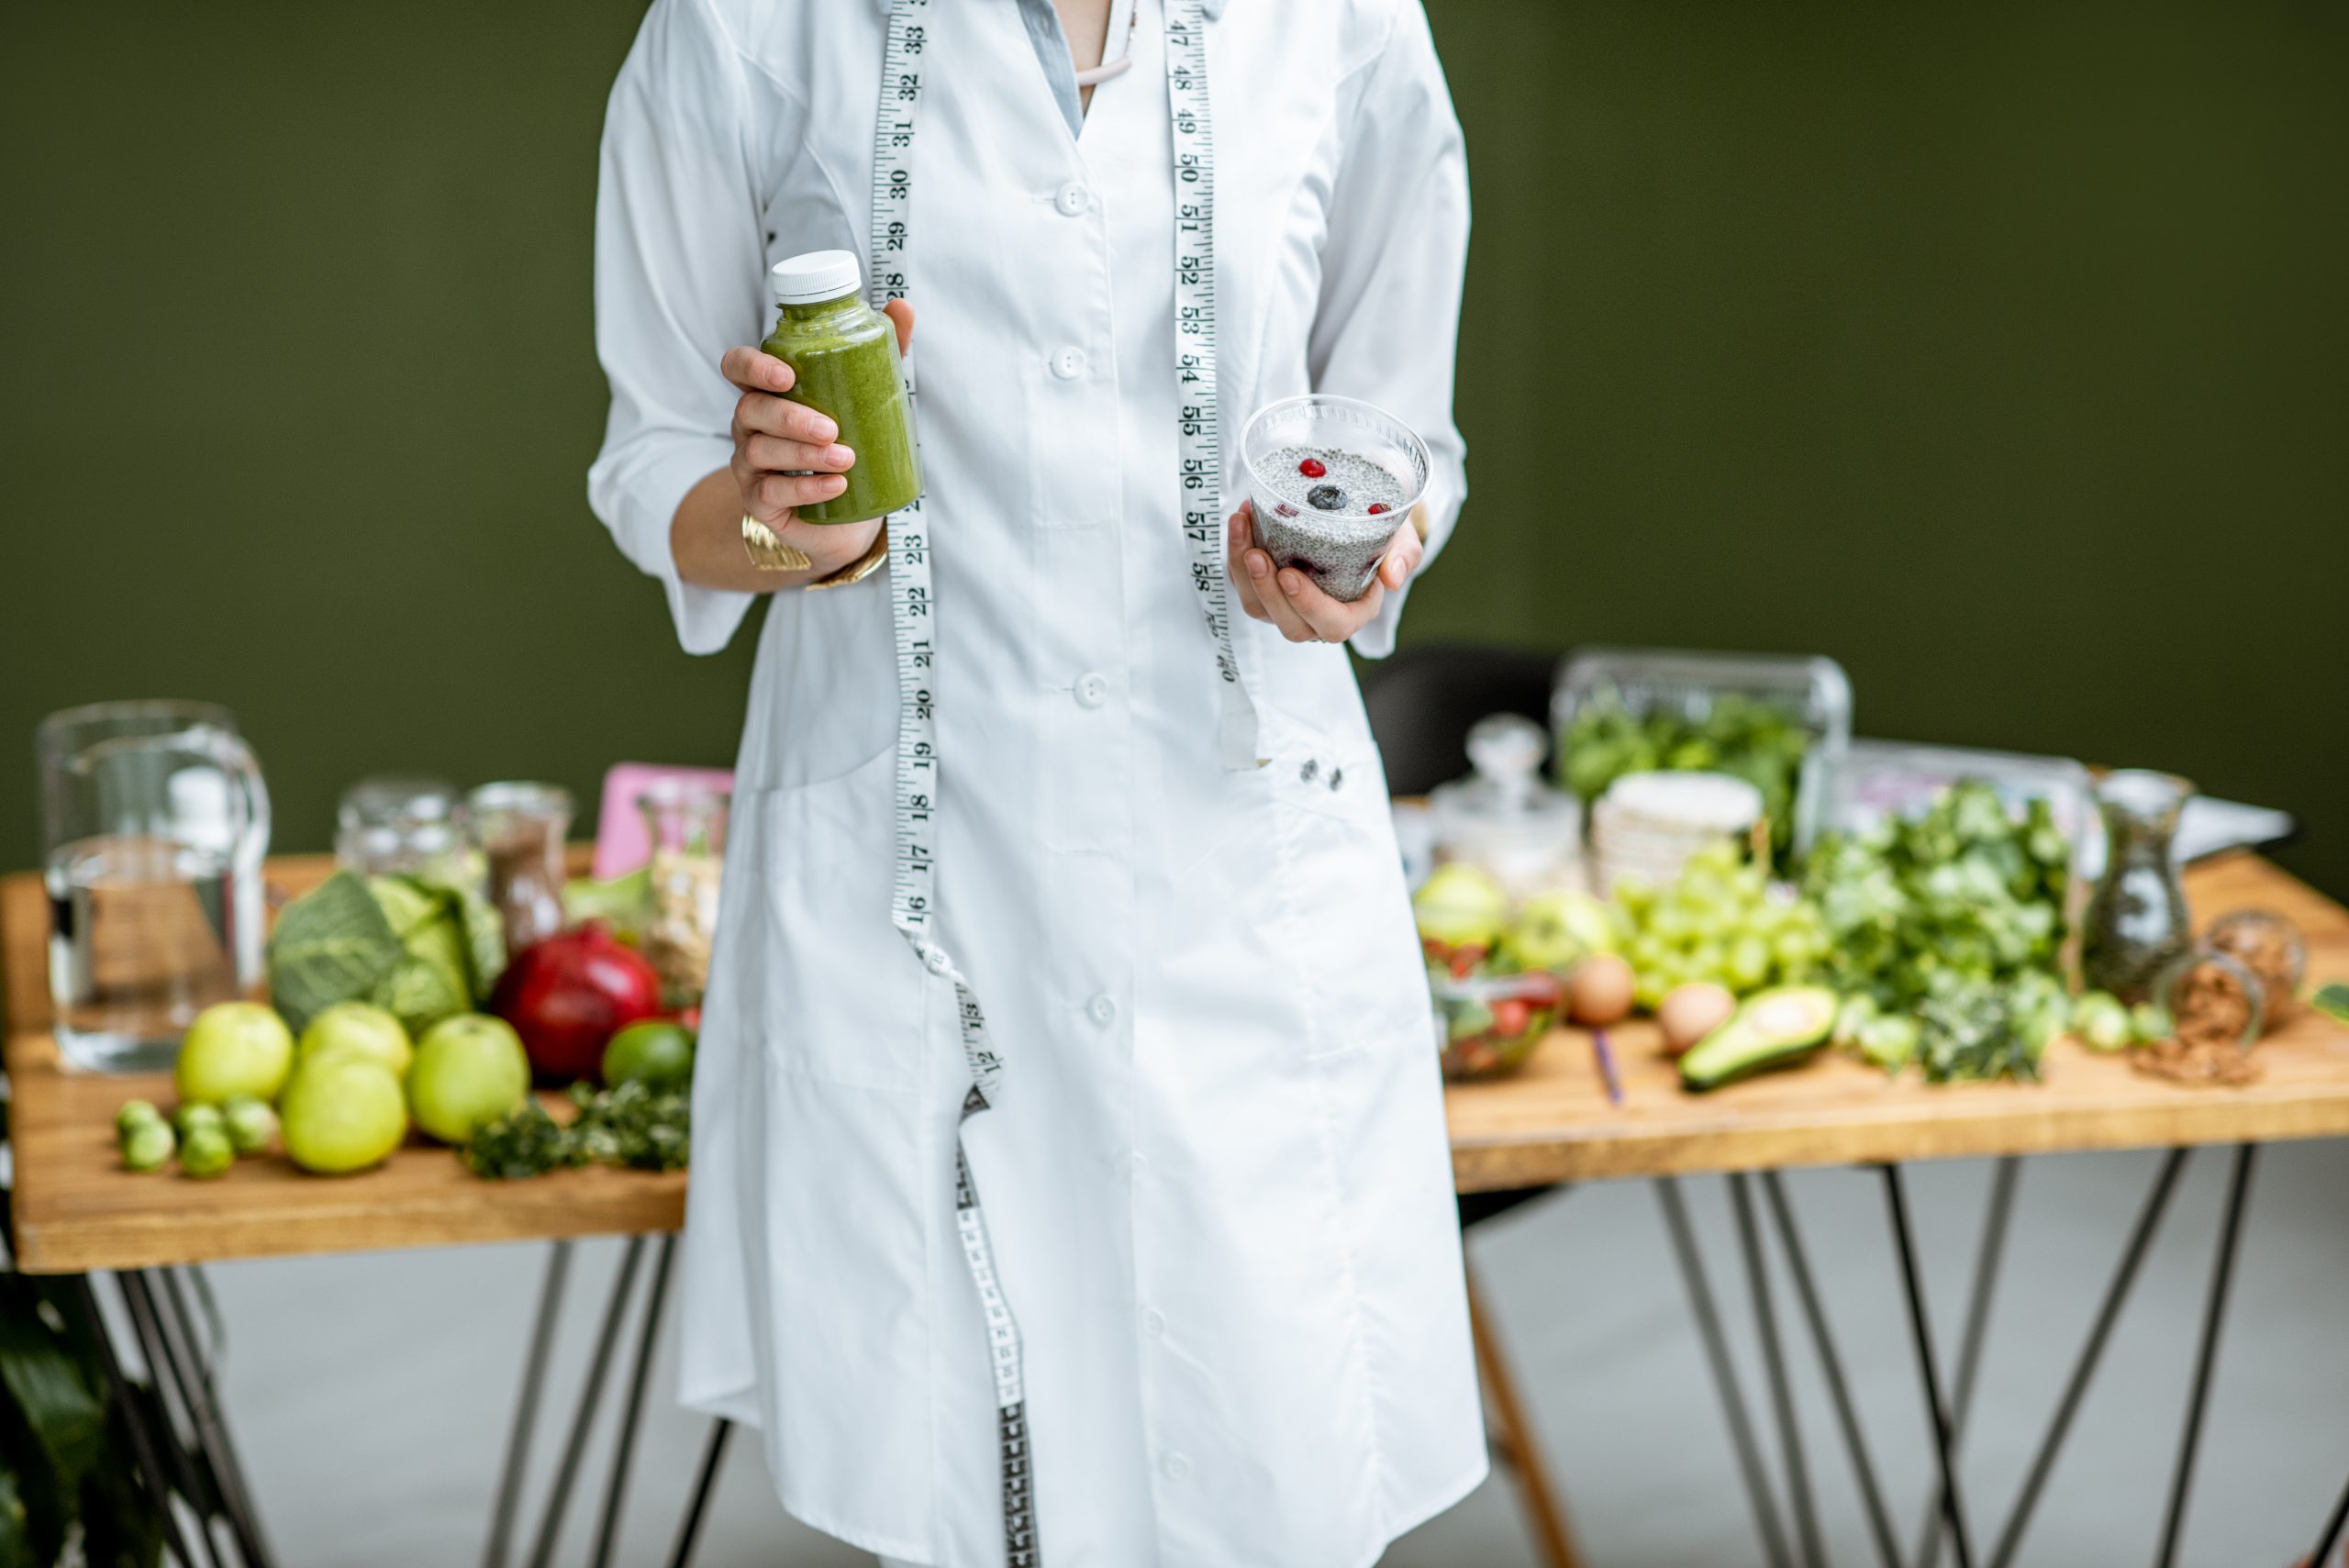 Nutritionist in medical gown holding salad and smoothie drink with healthy food on the background, close-up view with no face. Best 3-day colon cleanse for weight loss